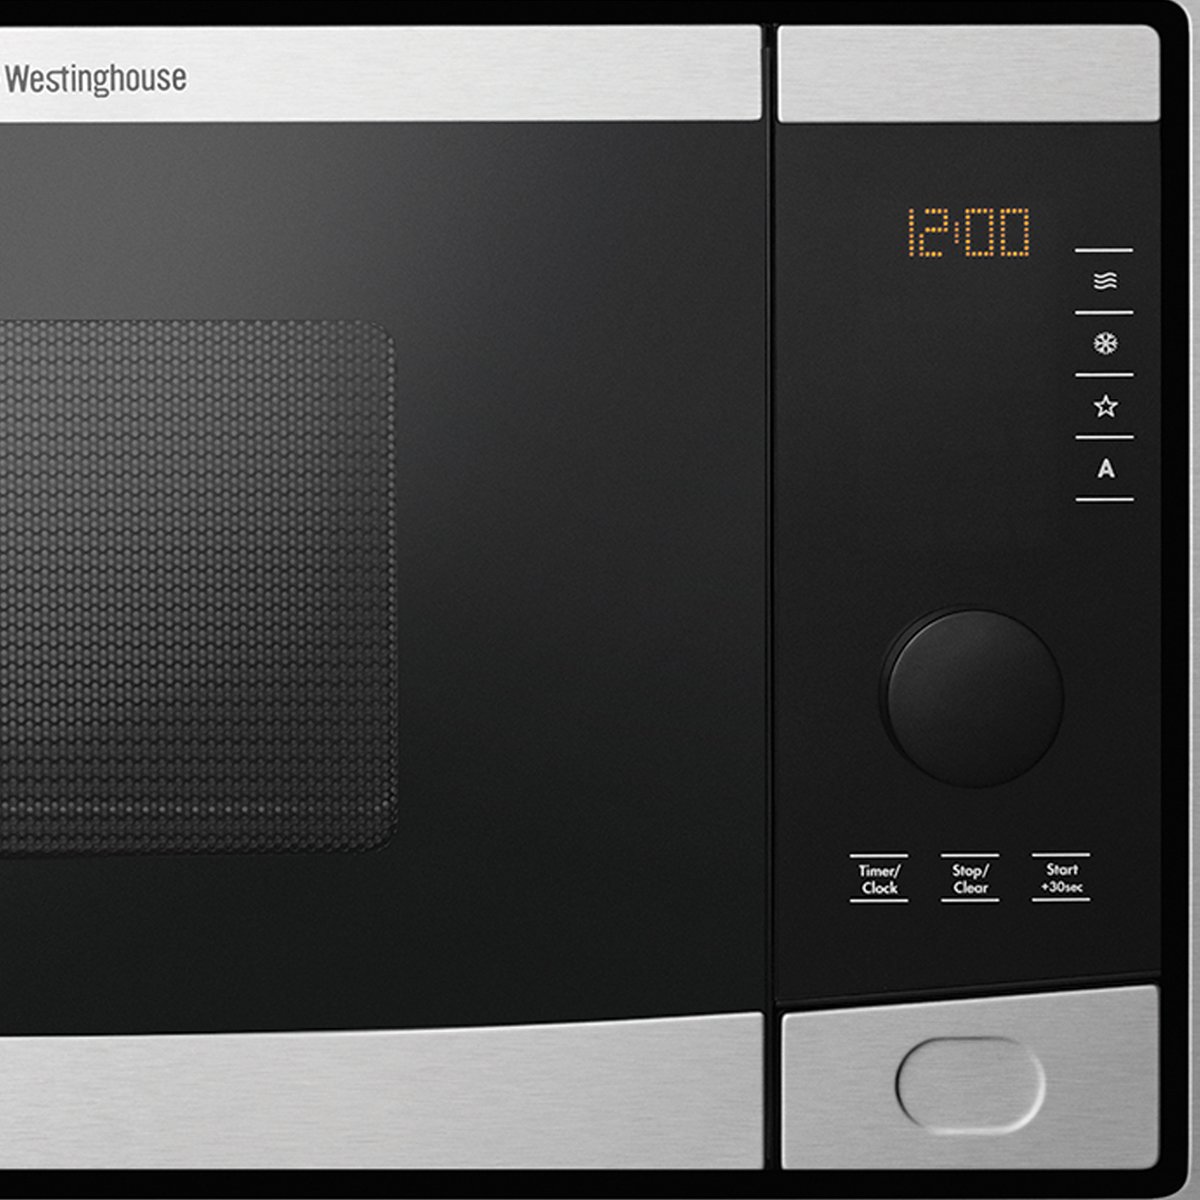 NEW Westinghouse WMB2802SA 28L Built-In 900W Microwave Oven | eBay